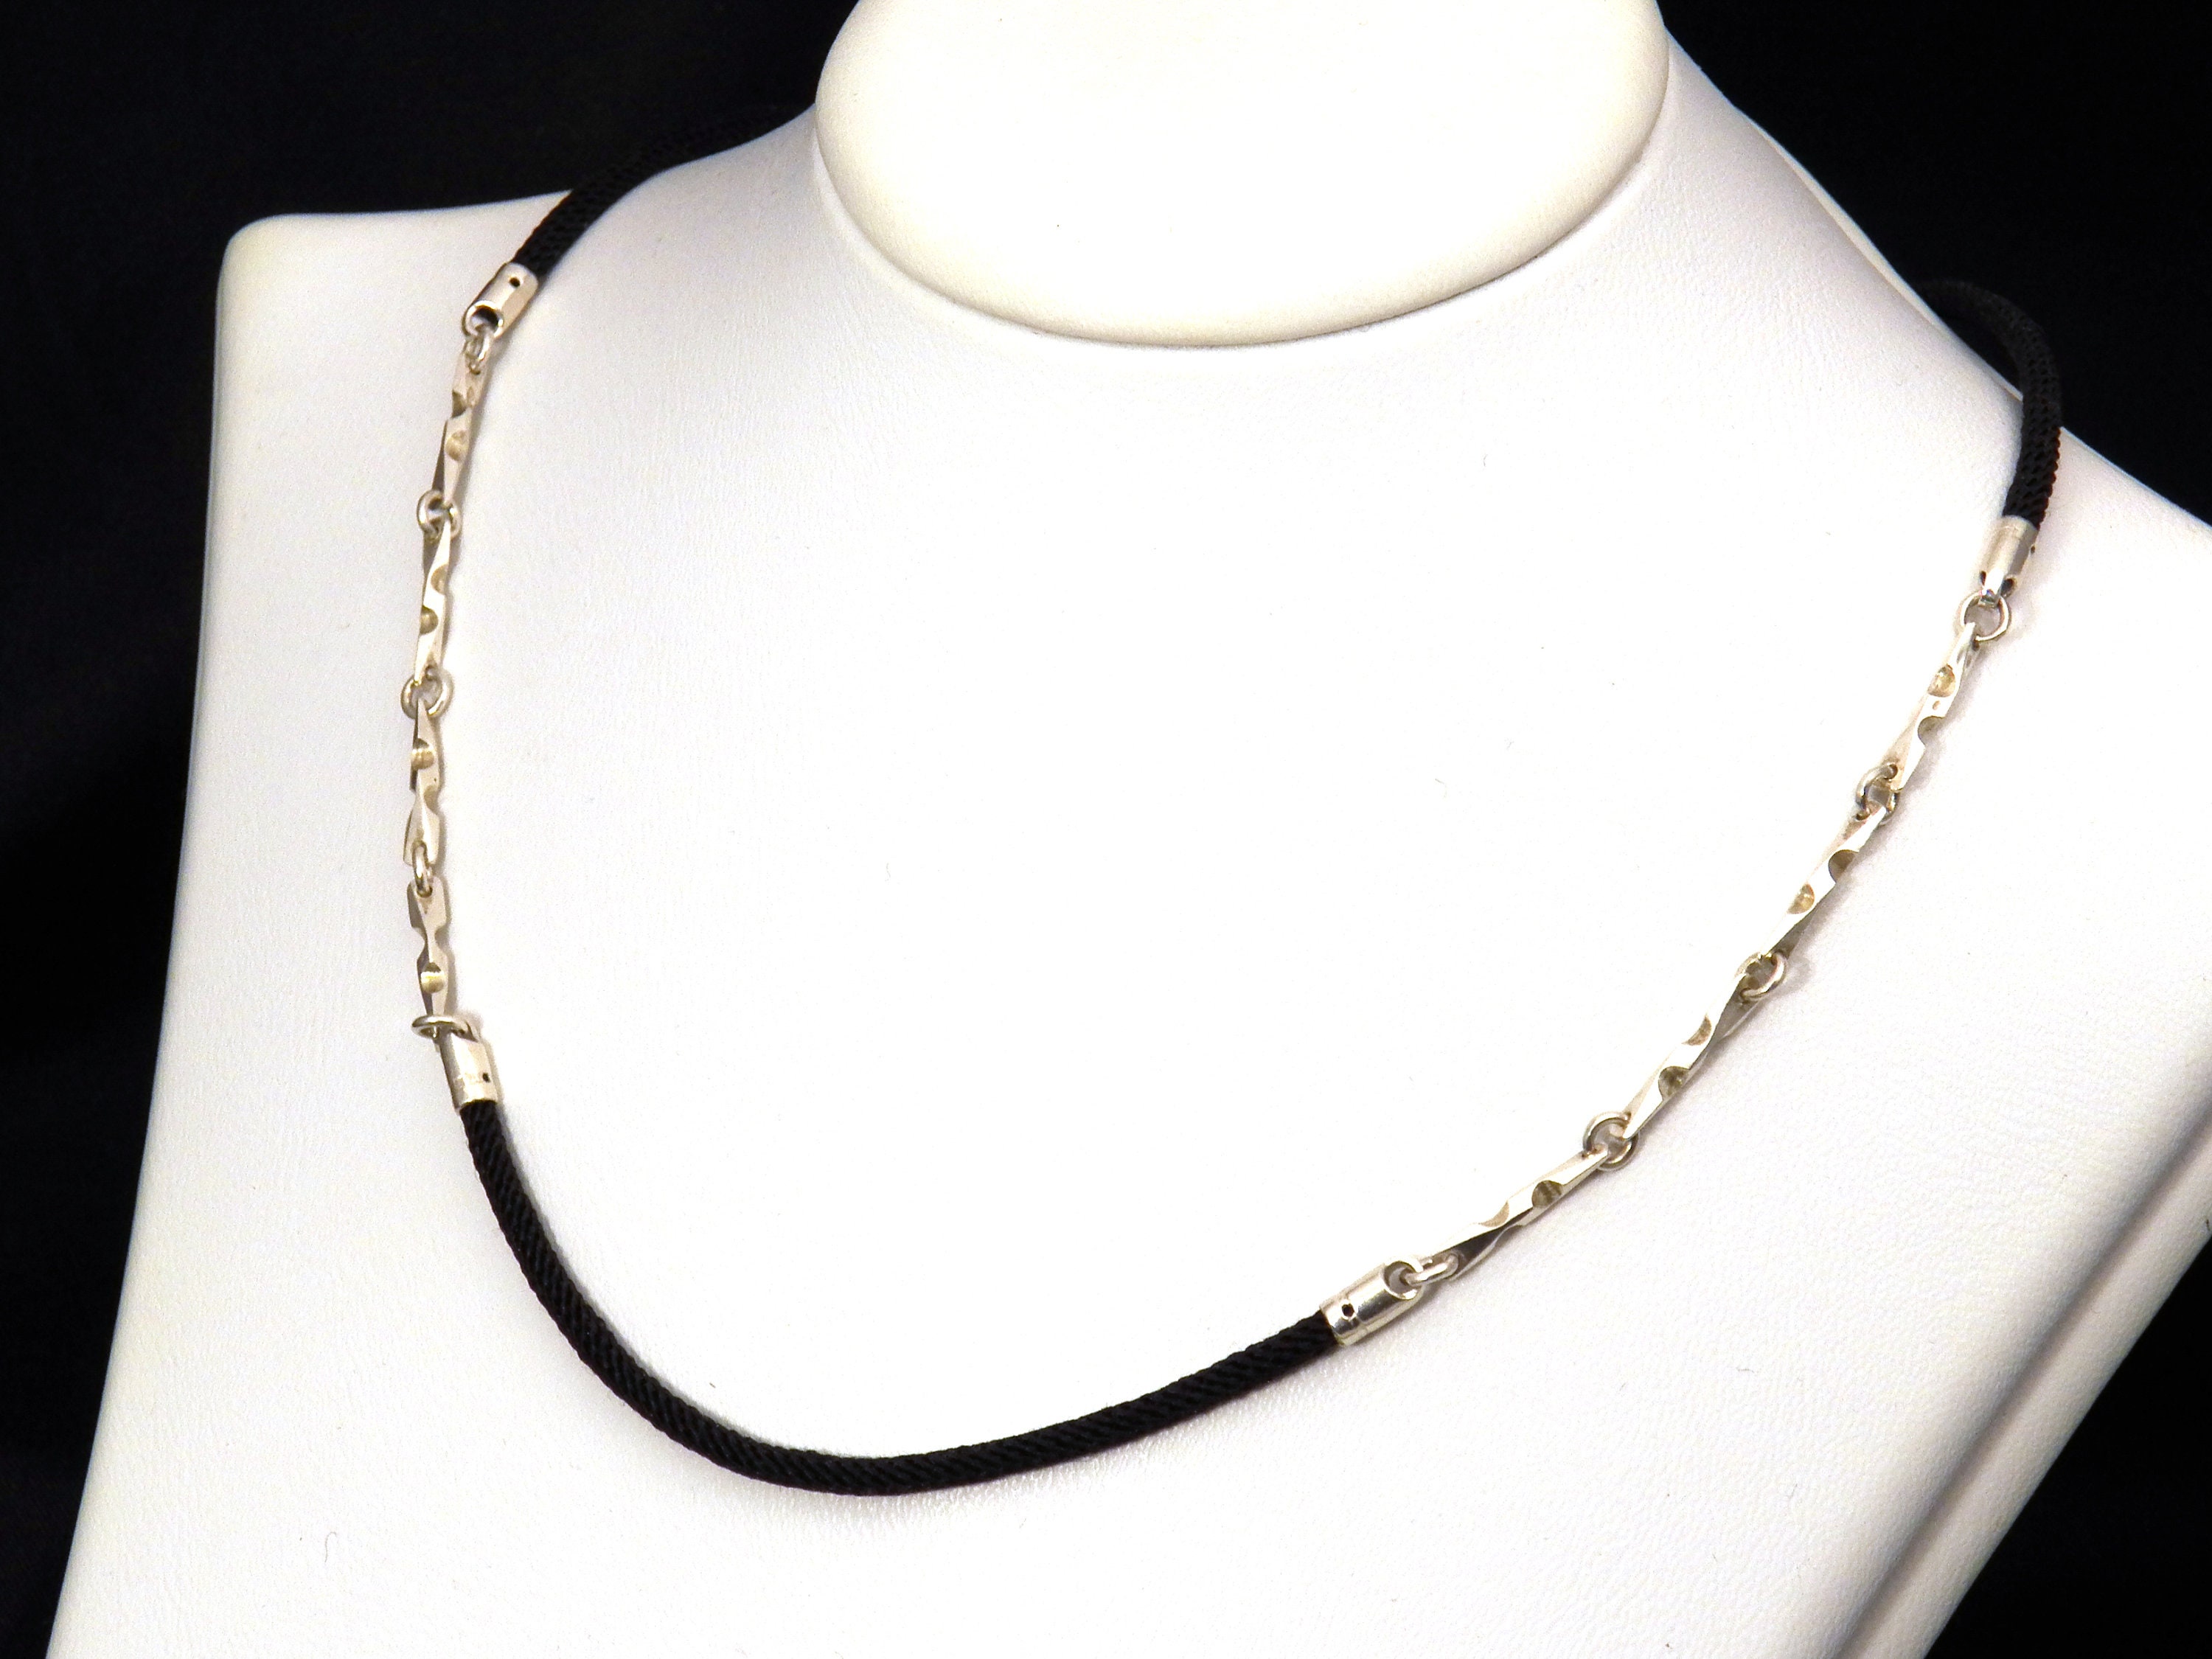 Geometric Link Chain Necklace Sterling Silver and Black Silk - Etsy